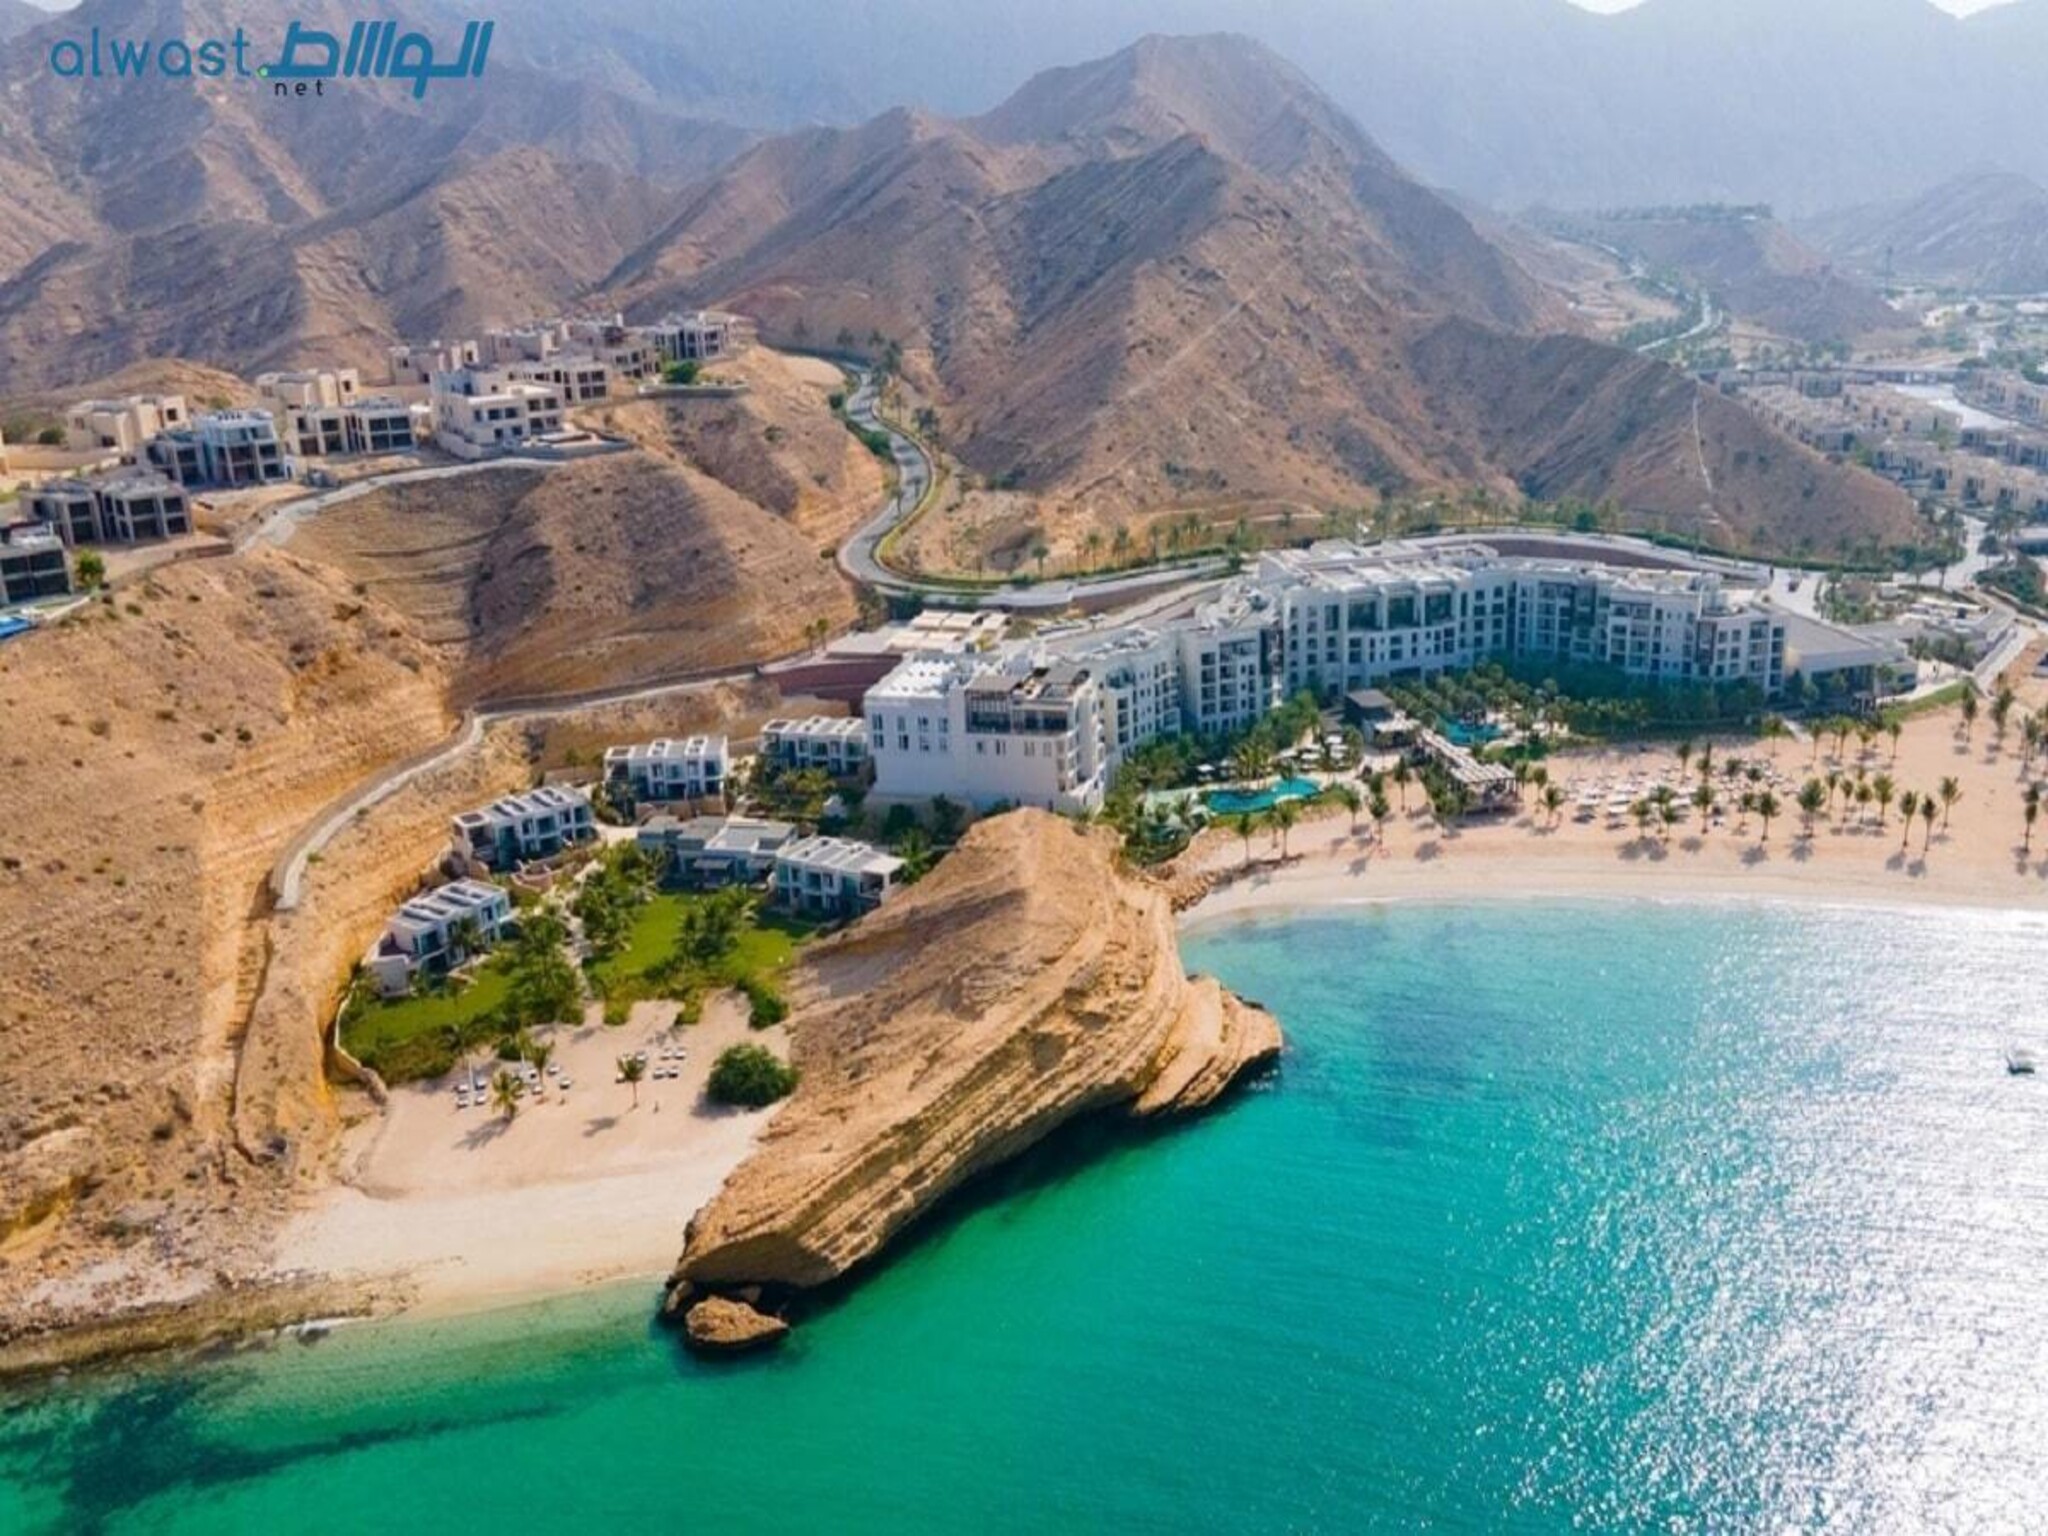 Oman introduces plans for 31 billion dollars in tourism investment by 2040